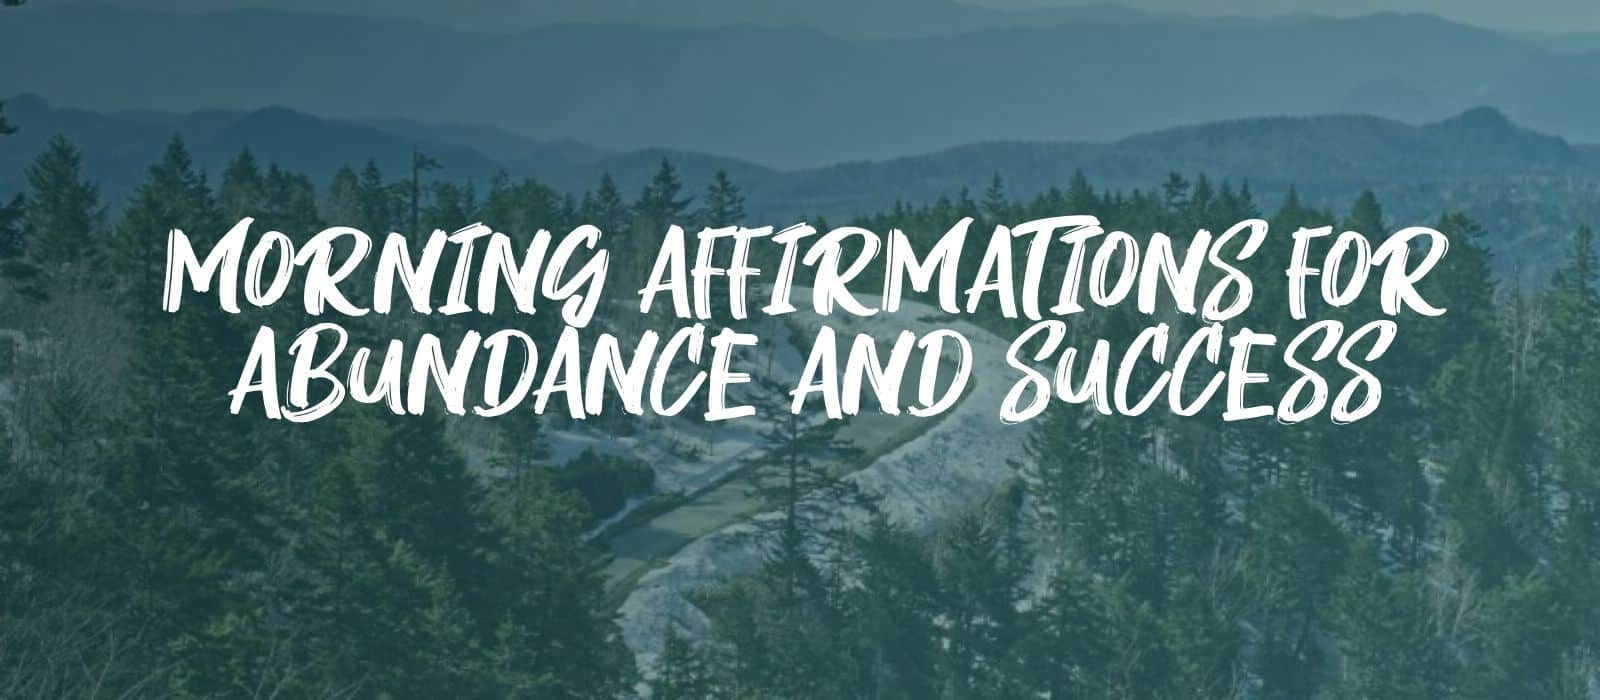 You are currently viewing Powerful Morning Affirmations for Abundance and Success